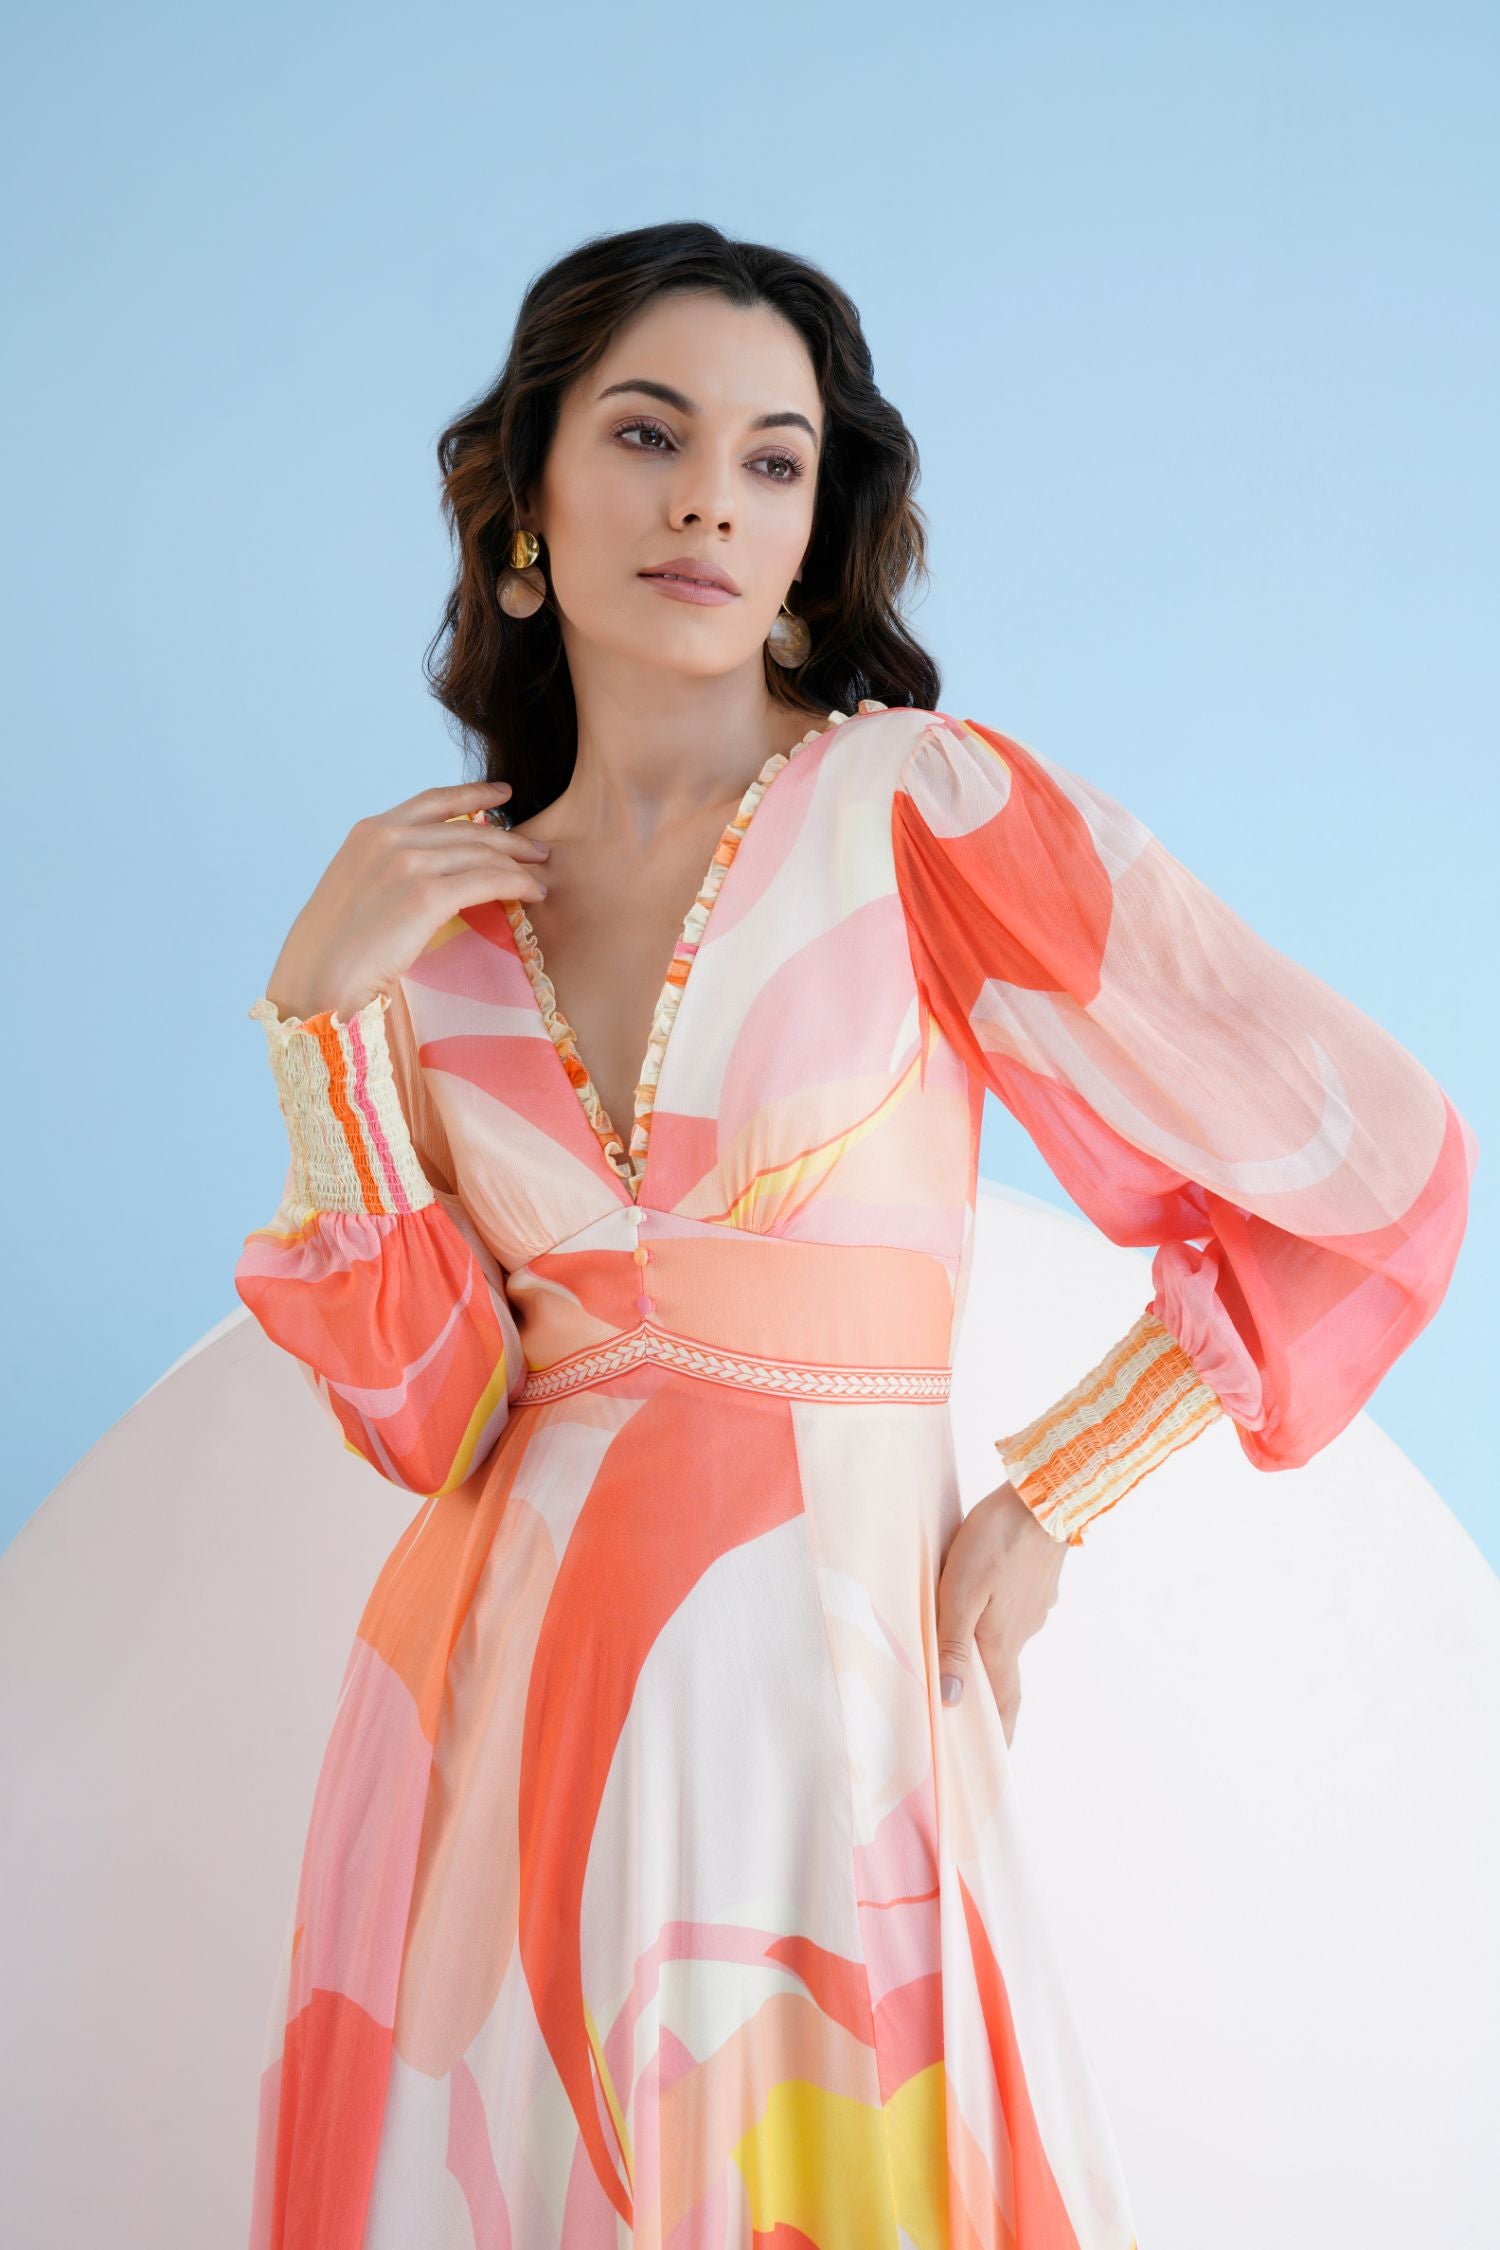 Peach Golden Ratio Printed Long Dress In Chiffon With Plunging
Neckline And Puff Sleeves